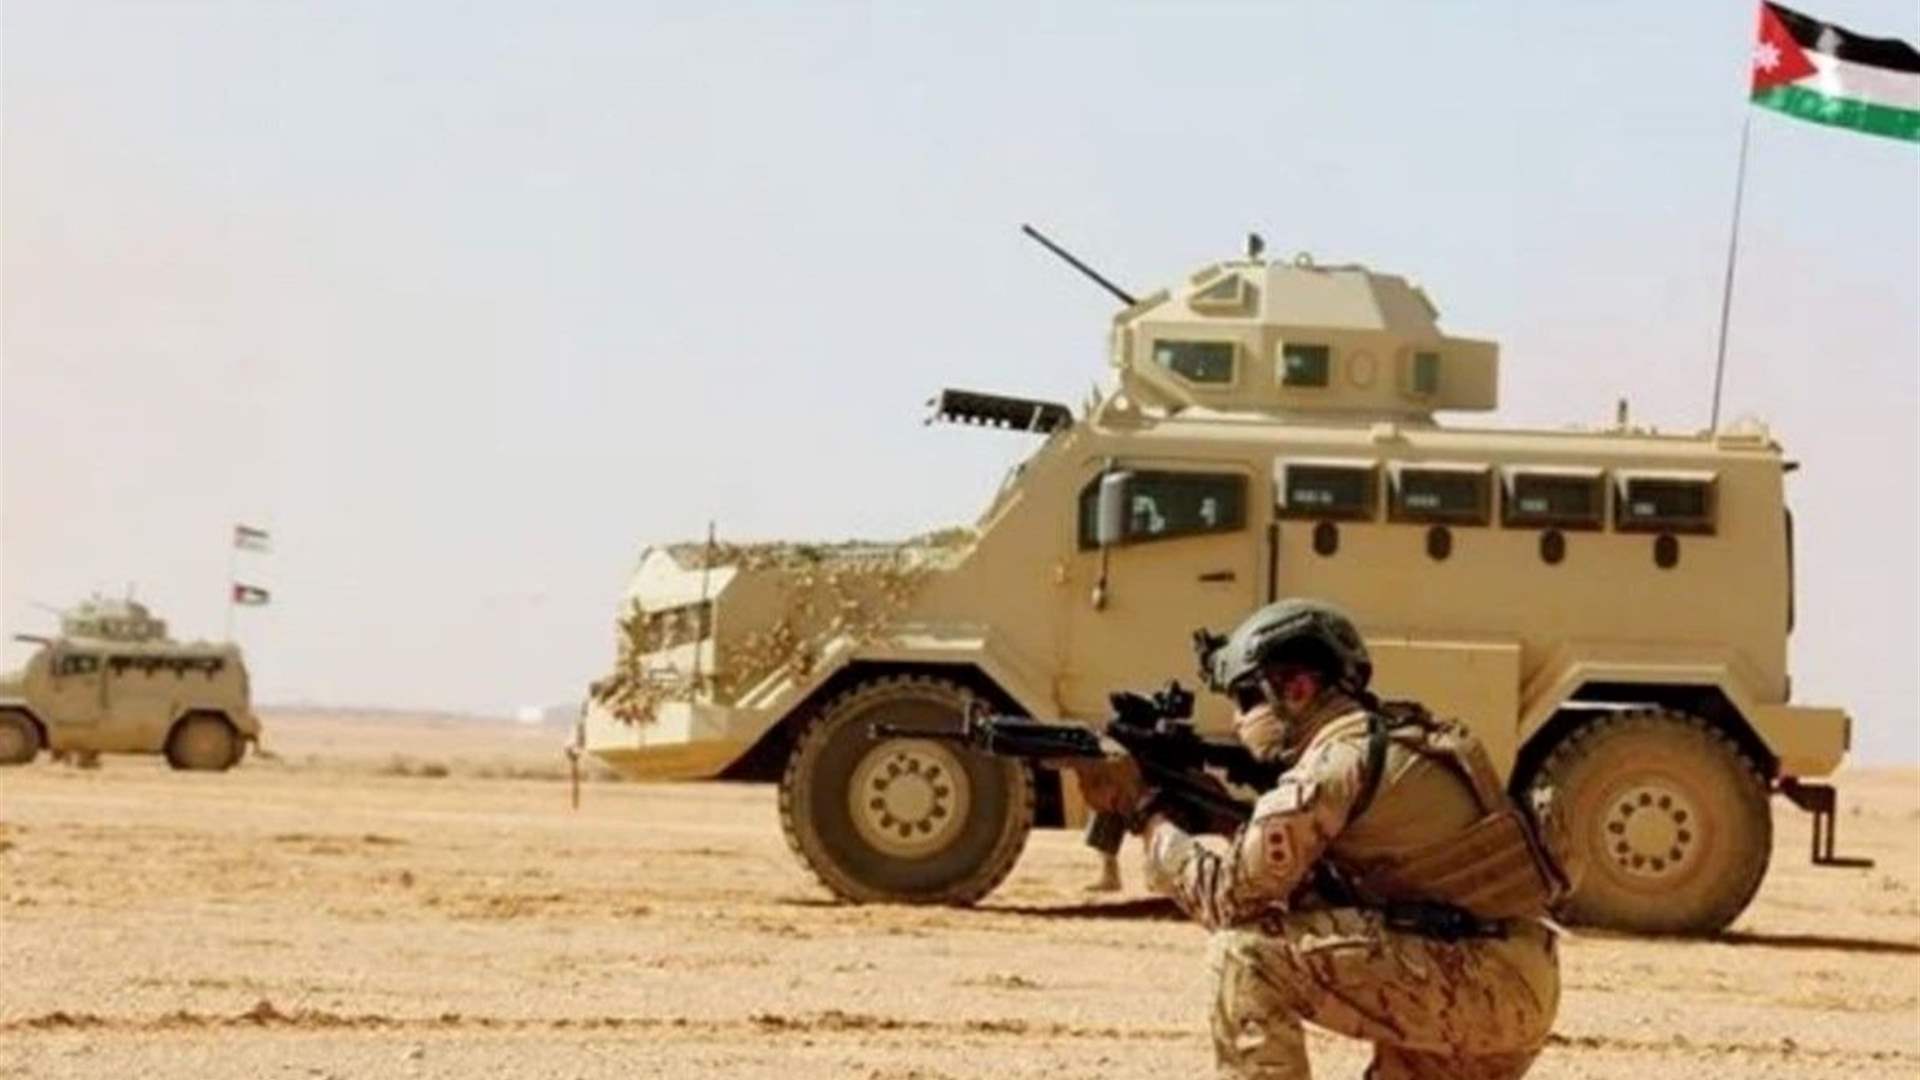 Jordanian army: Injuries among border guard forces in clashes on border with Syria 